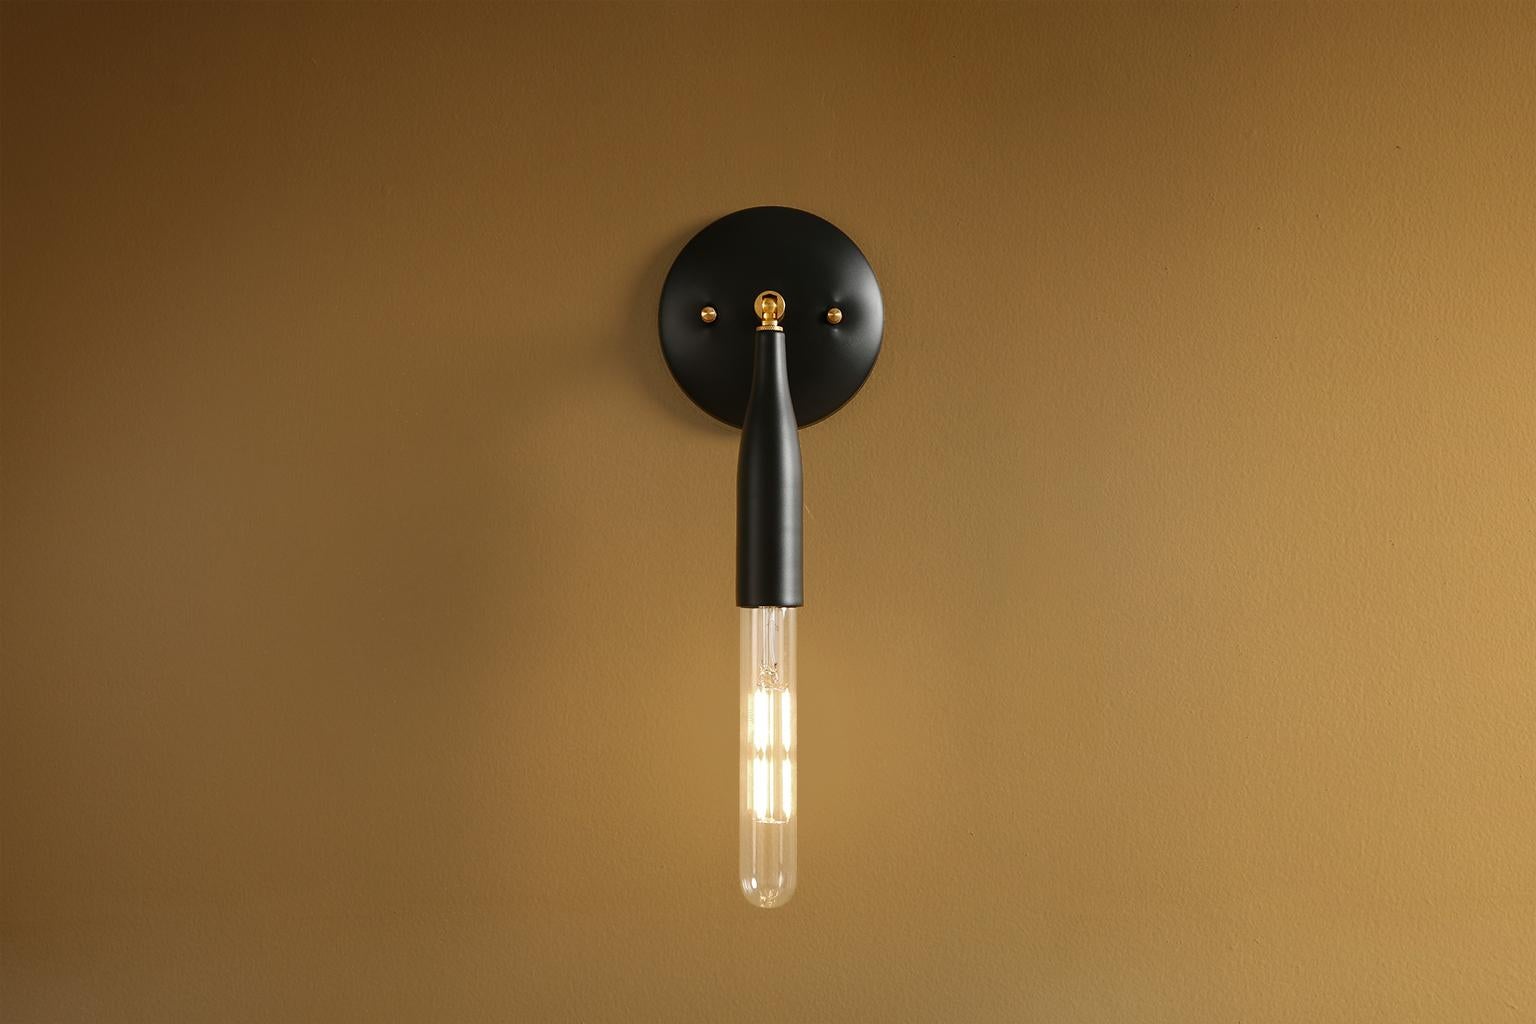 A minimalist wall sconce, this contemporary light fixture adjusts up and down and side to side. The custom-made flute is perfectly proportioned to echo the curves of a champagne glass. Powder coated colors, metallic details, and exposed bulbs give a